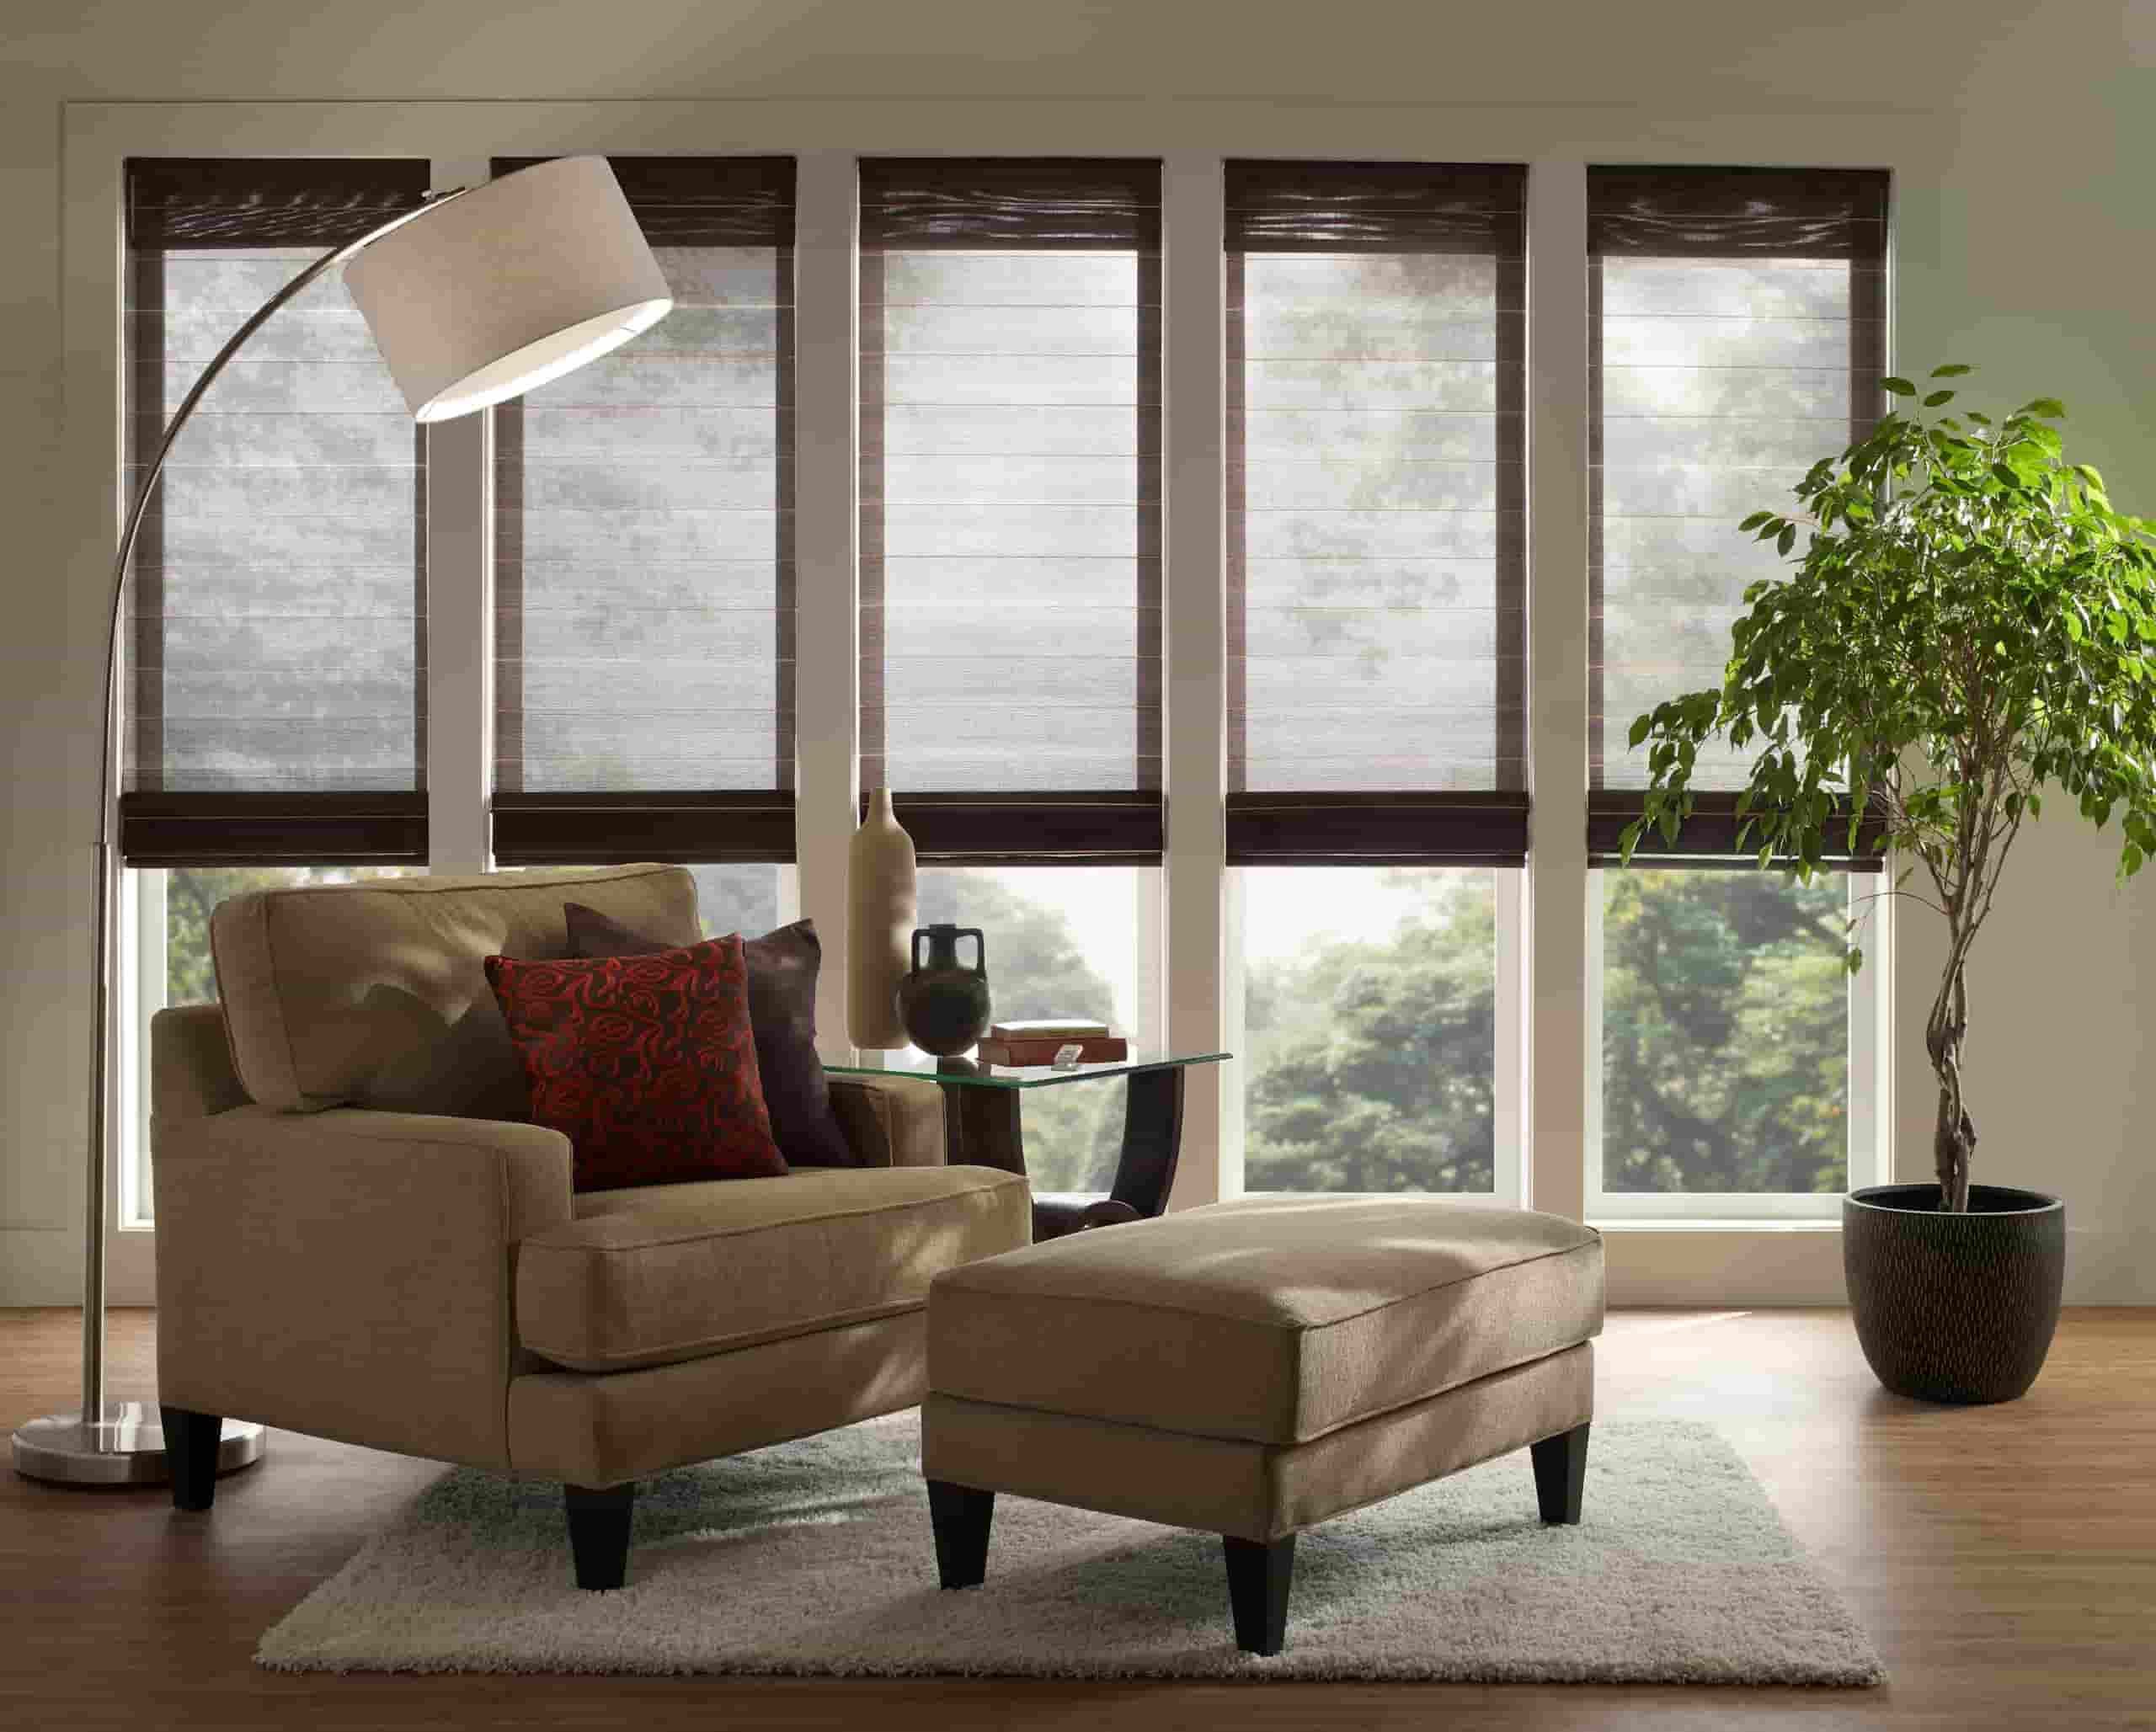 Choosing Lutron Serena Smart Shades for Your Home